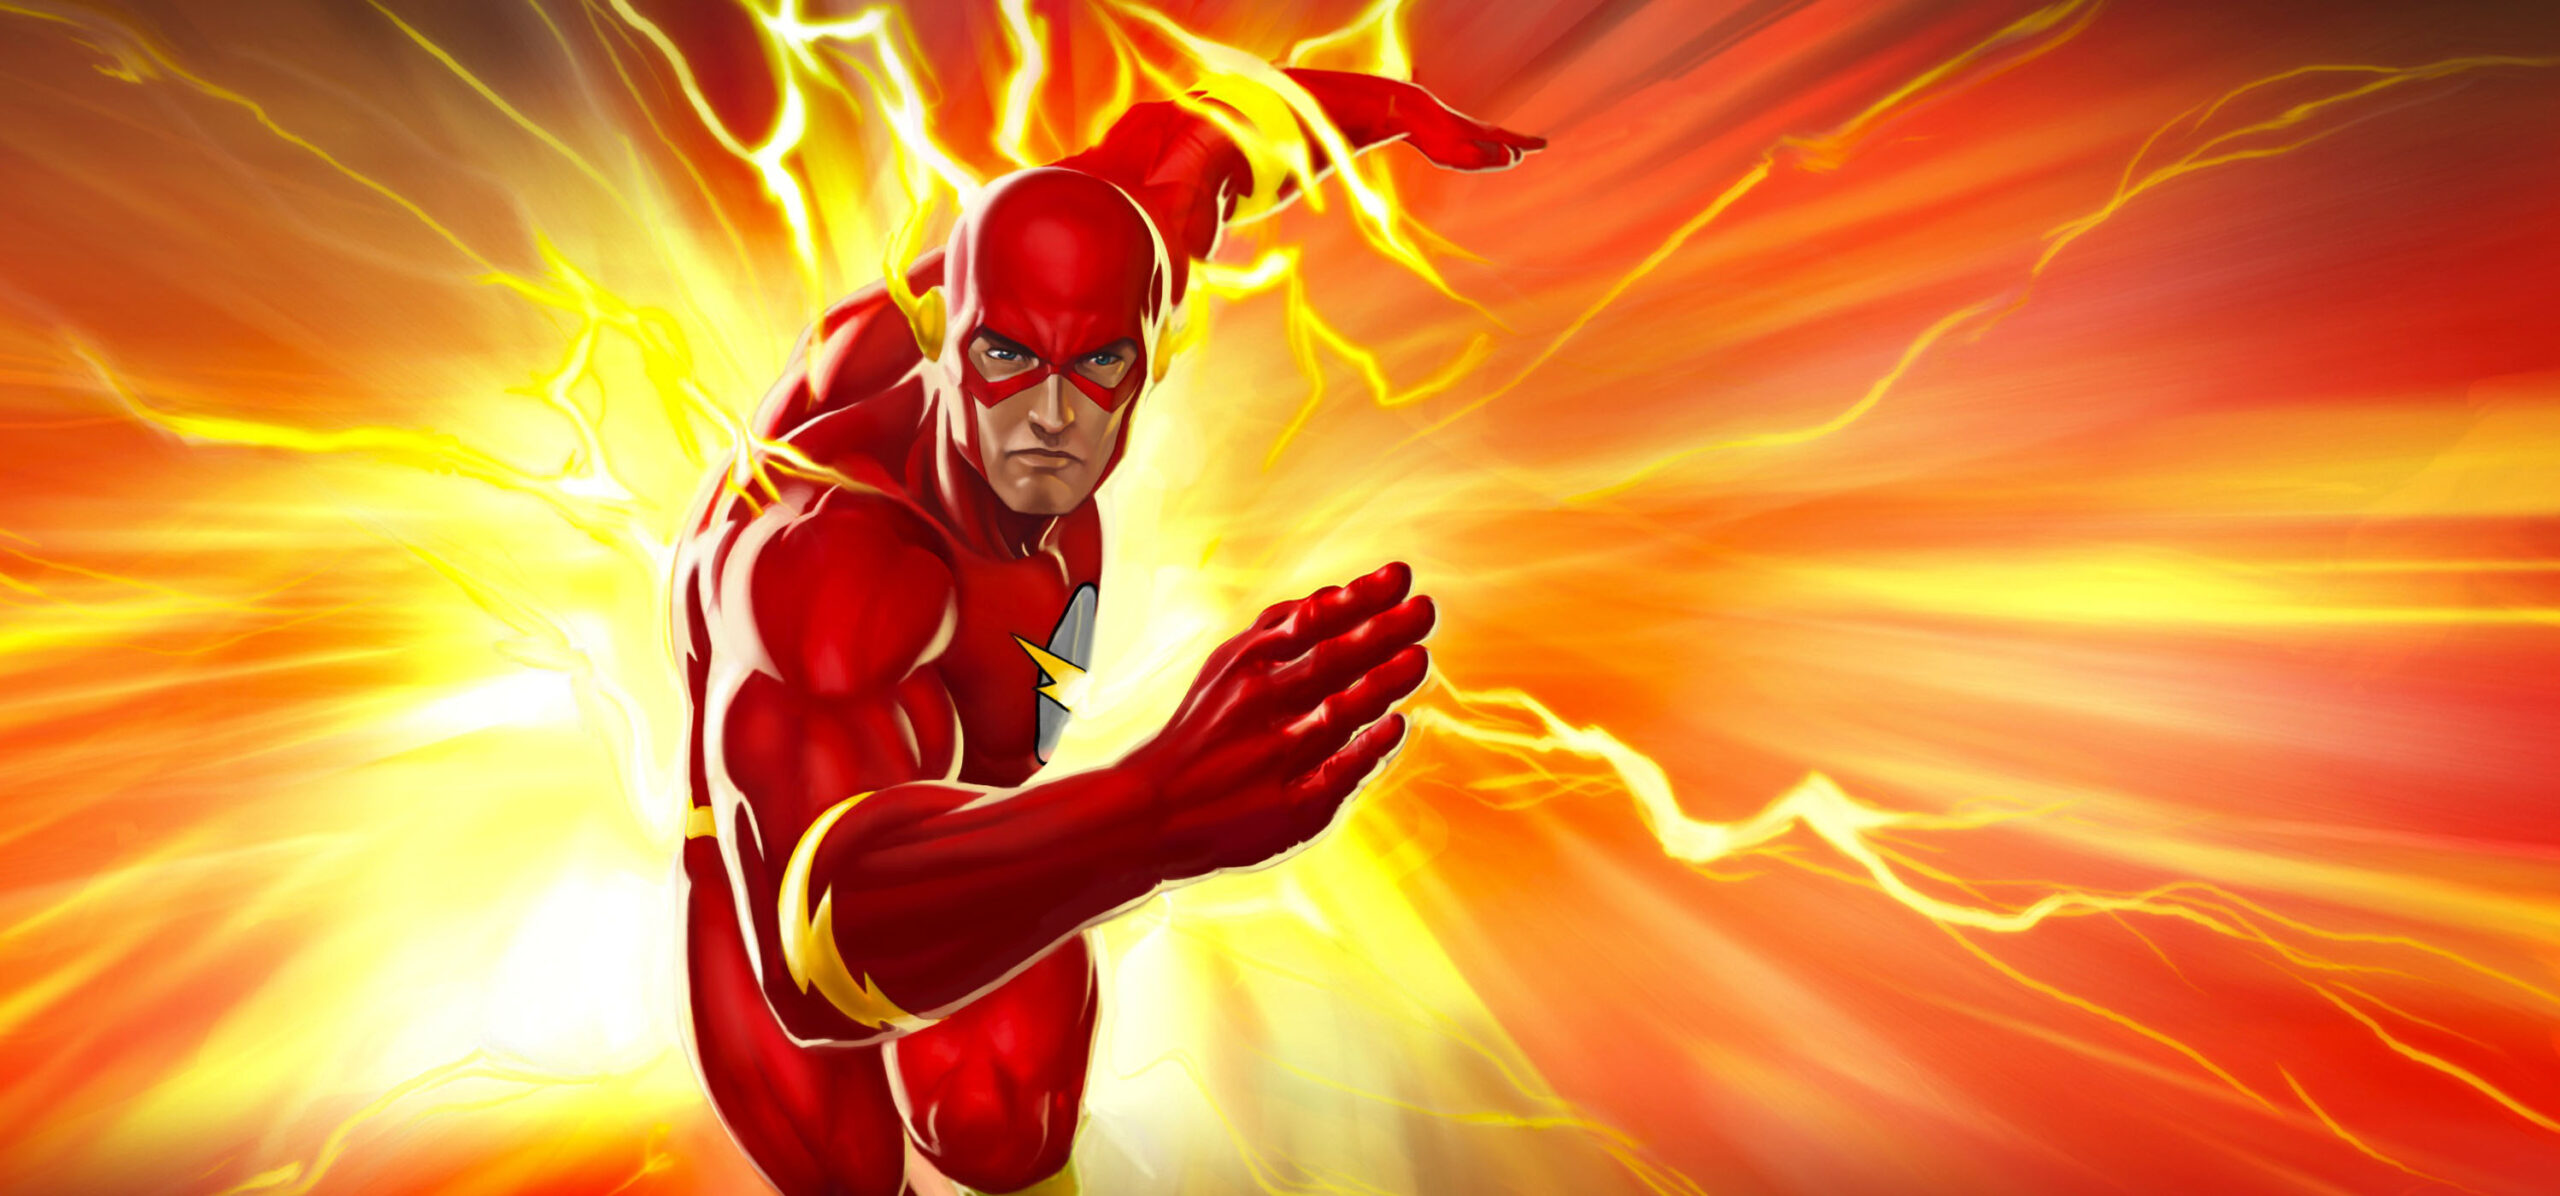 the flash - Phil Lord et Chris Miller pour le film The Flash ? TheFlash scaled